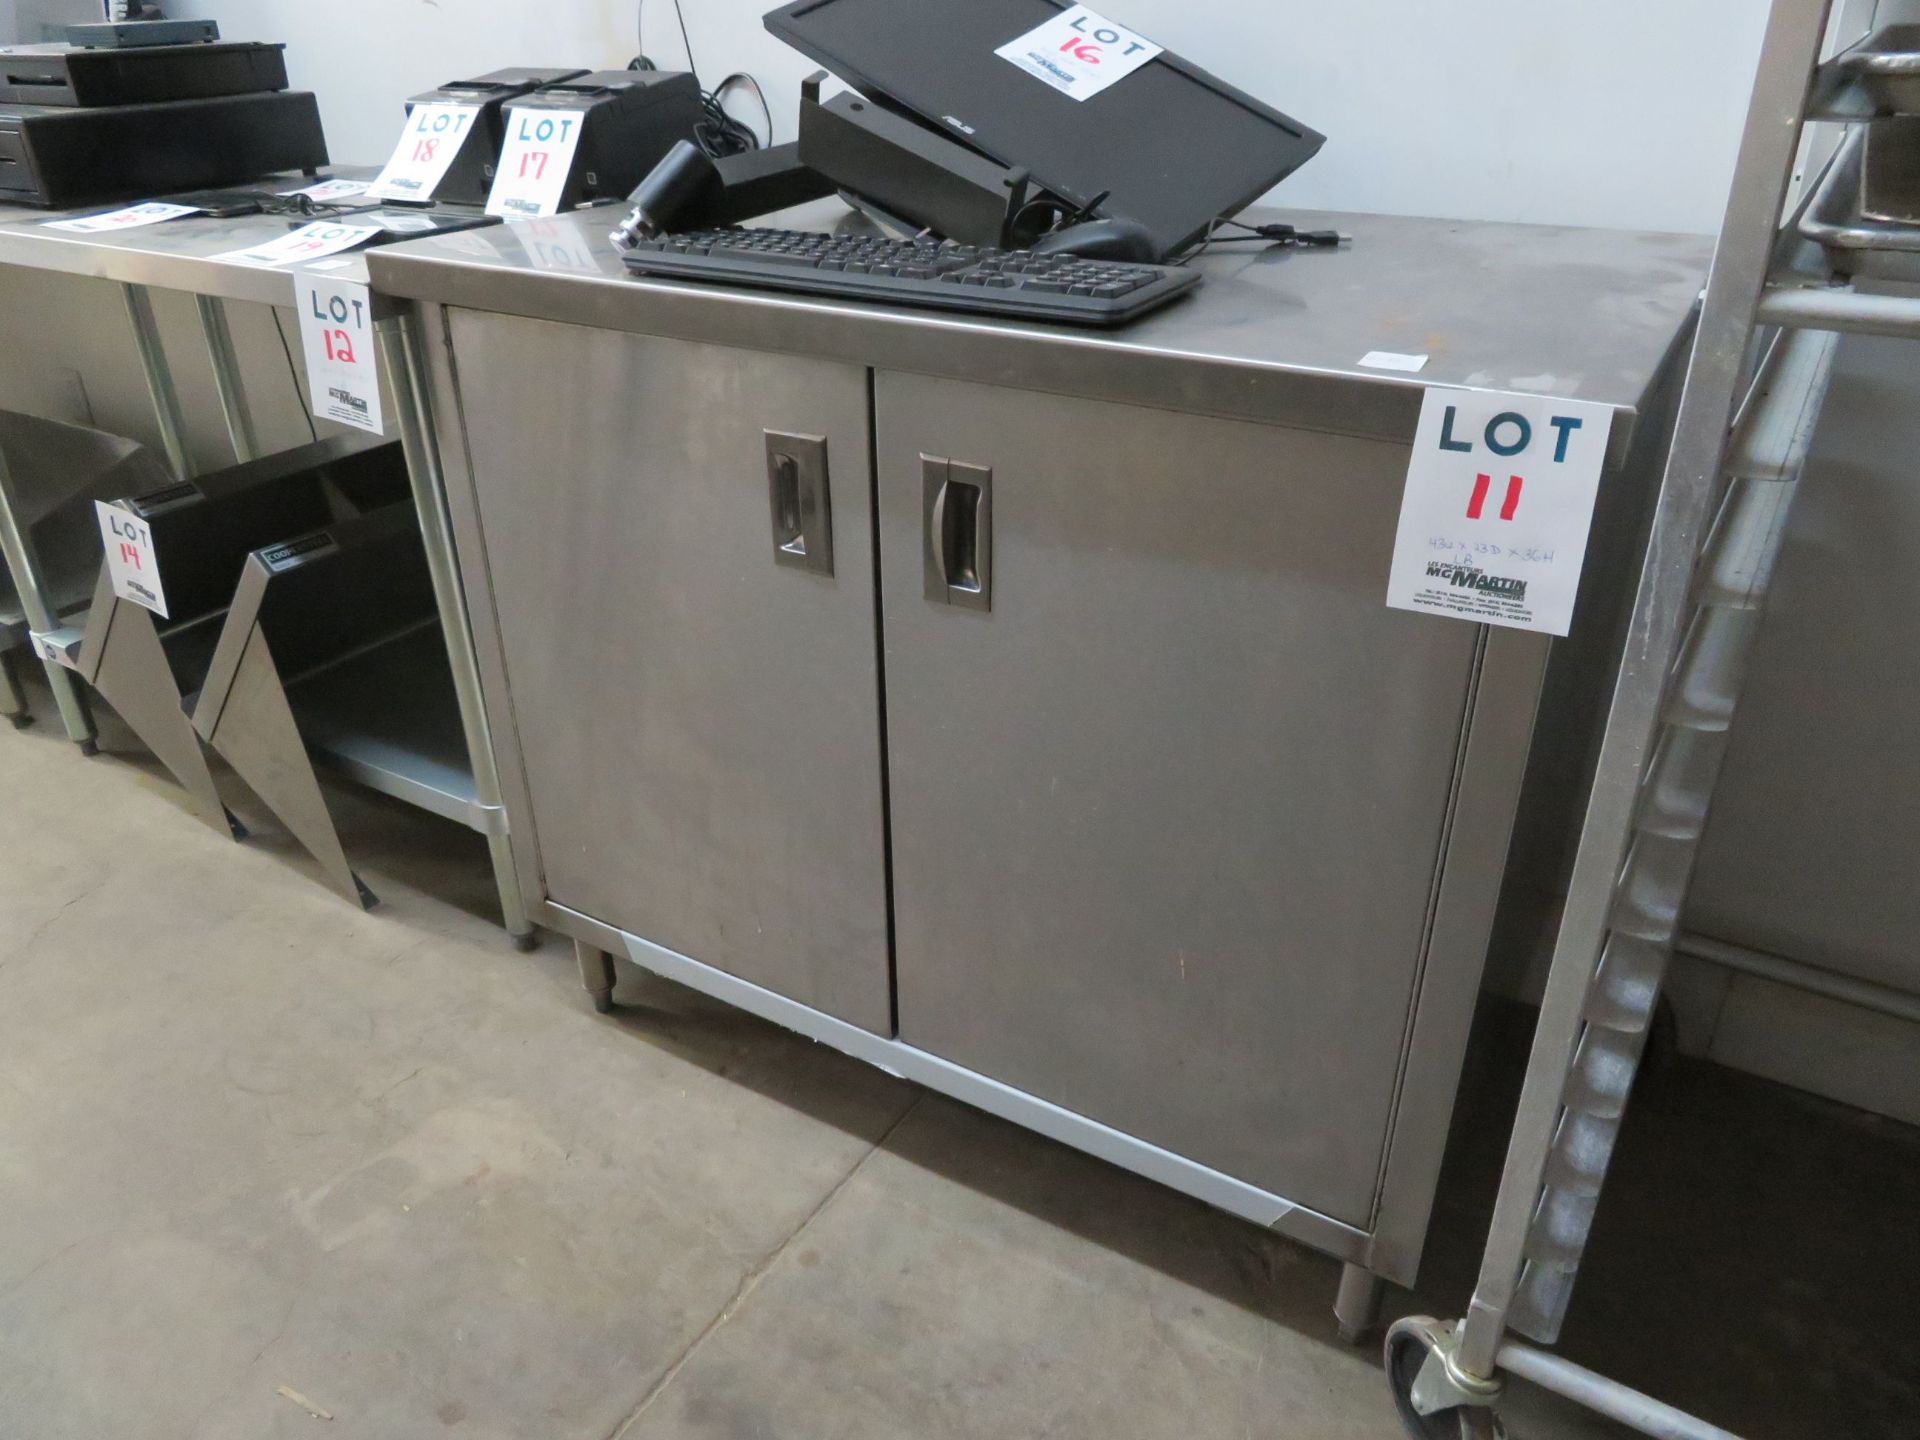 2 door stainless steel cabinet approx. 43"w x 23"d x 36"h